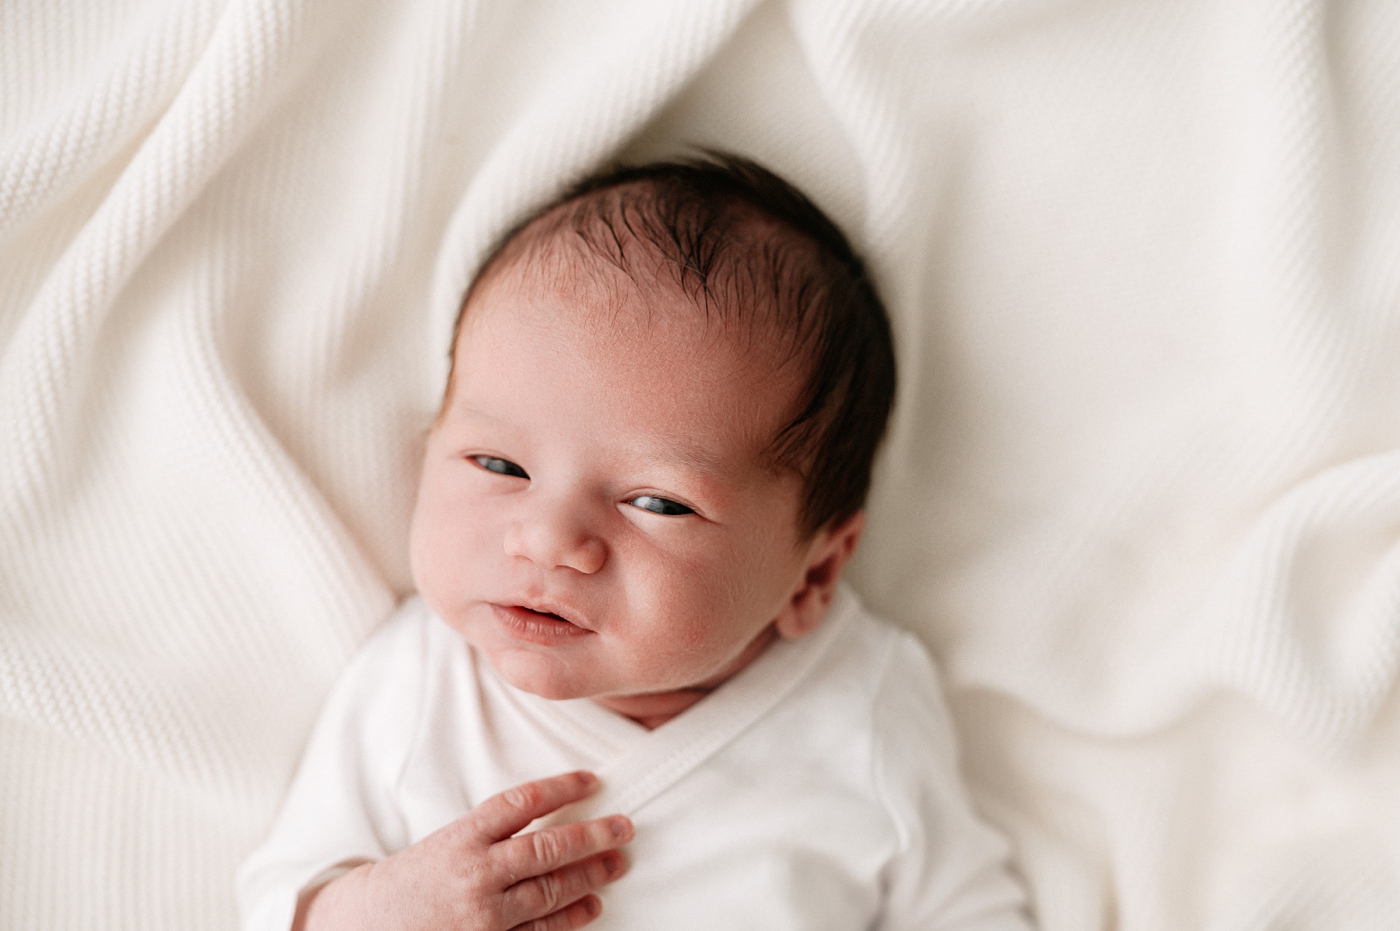 Baby makes eye contact with camera during in studio newborn session. Photo by Meg Newton Photography.